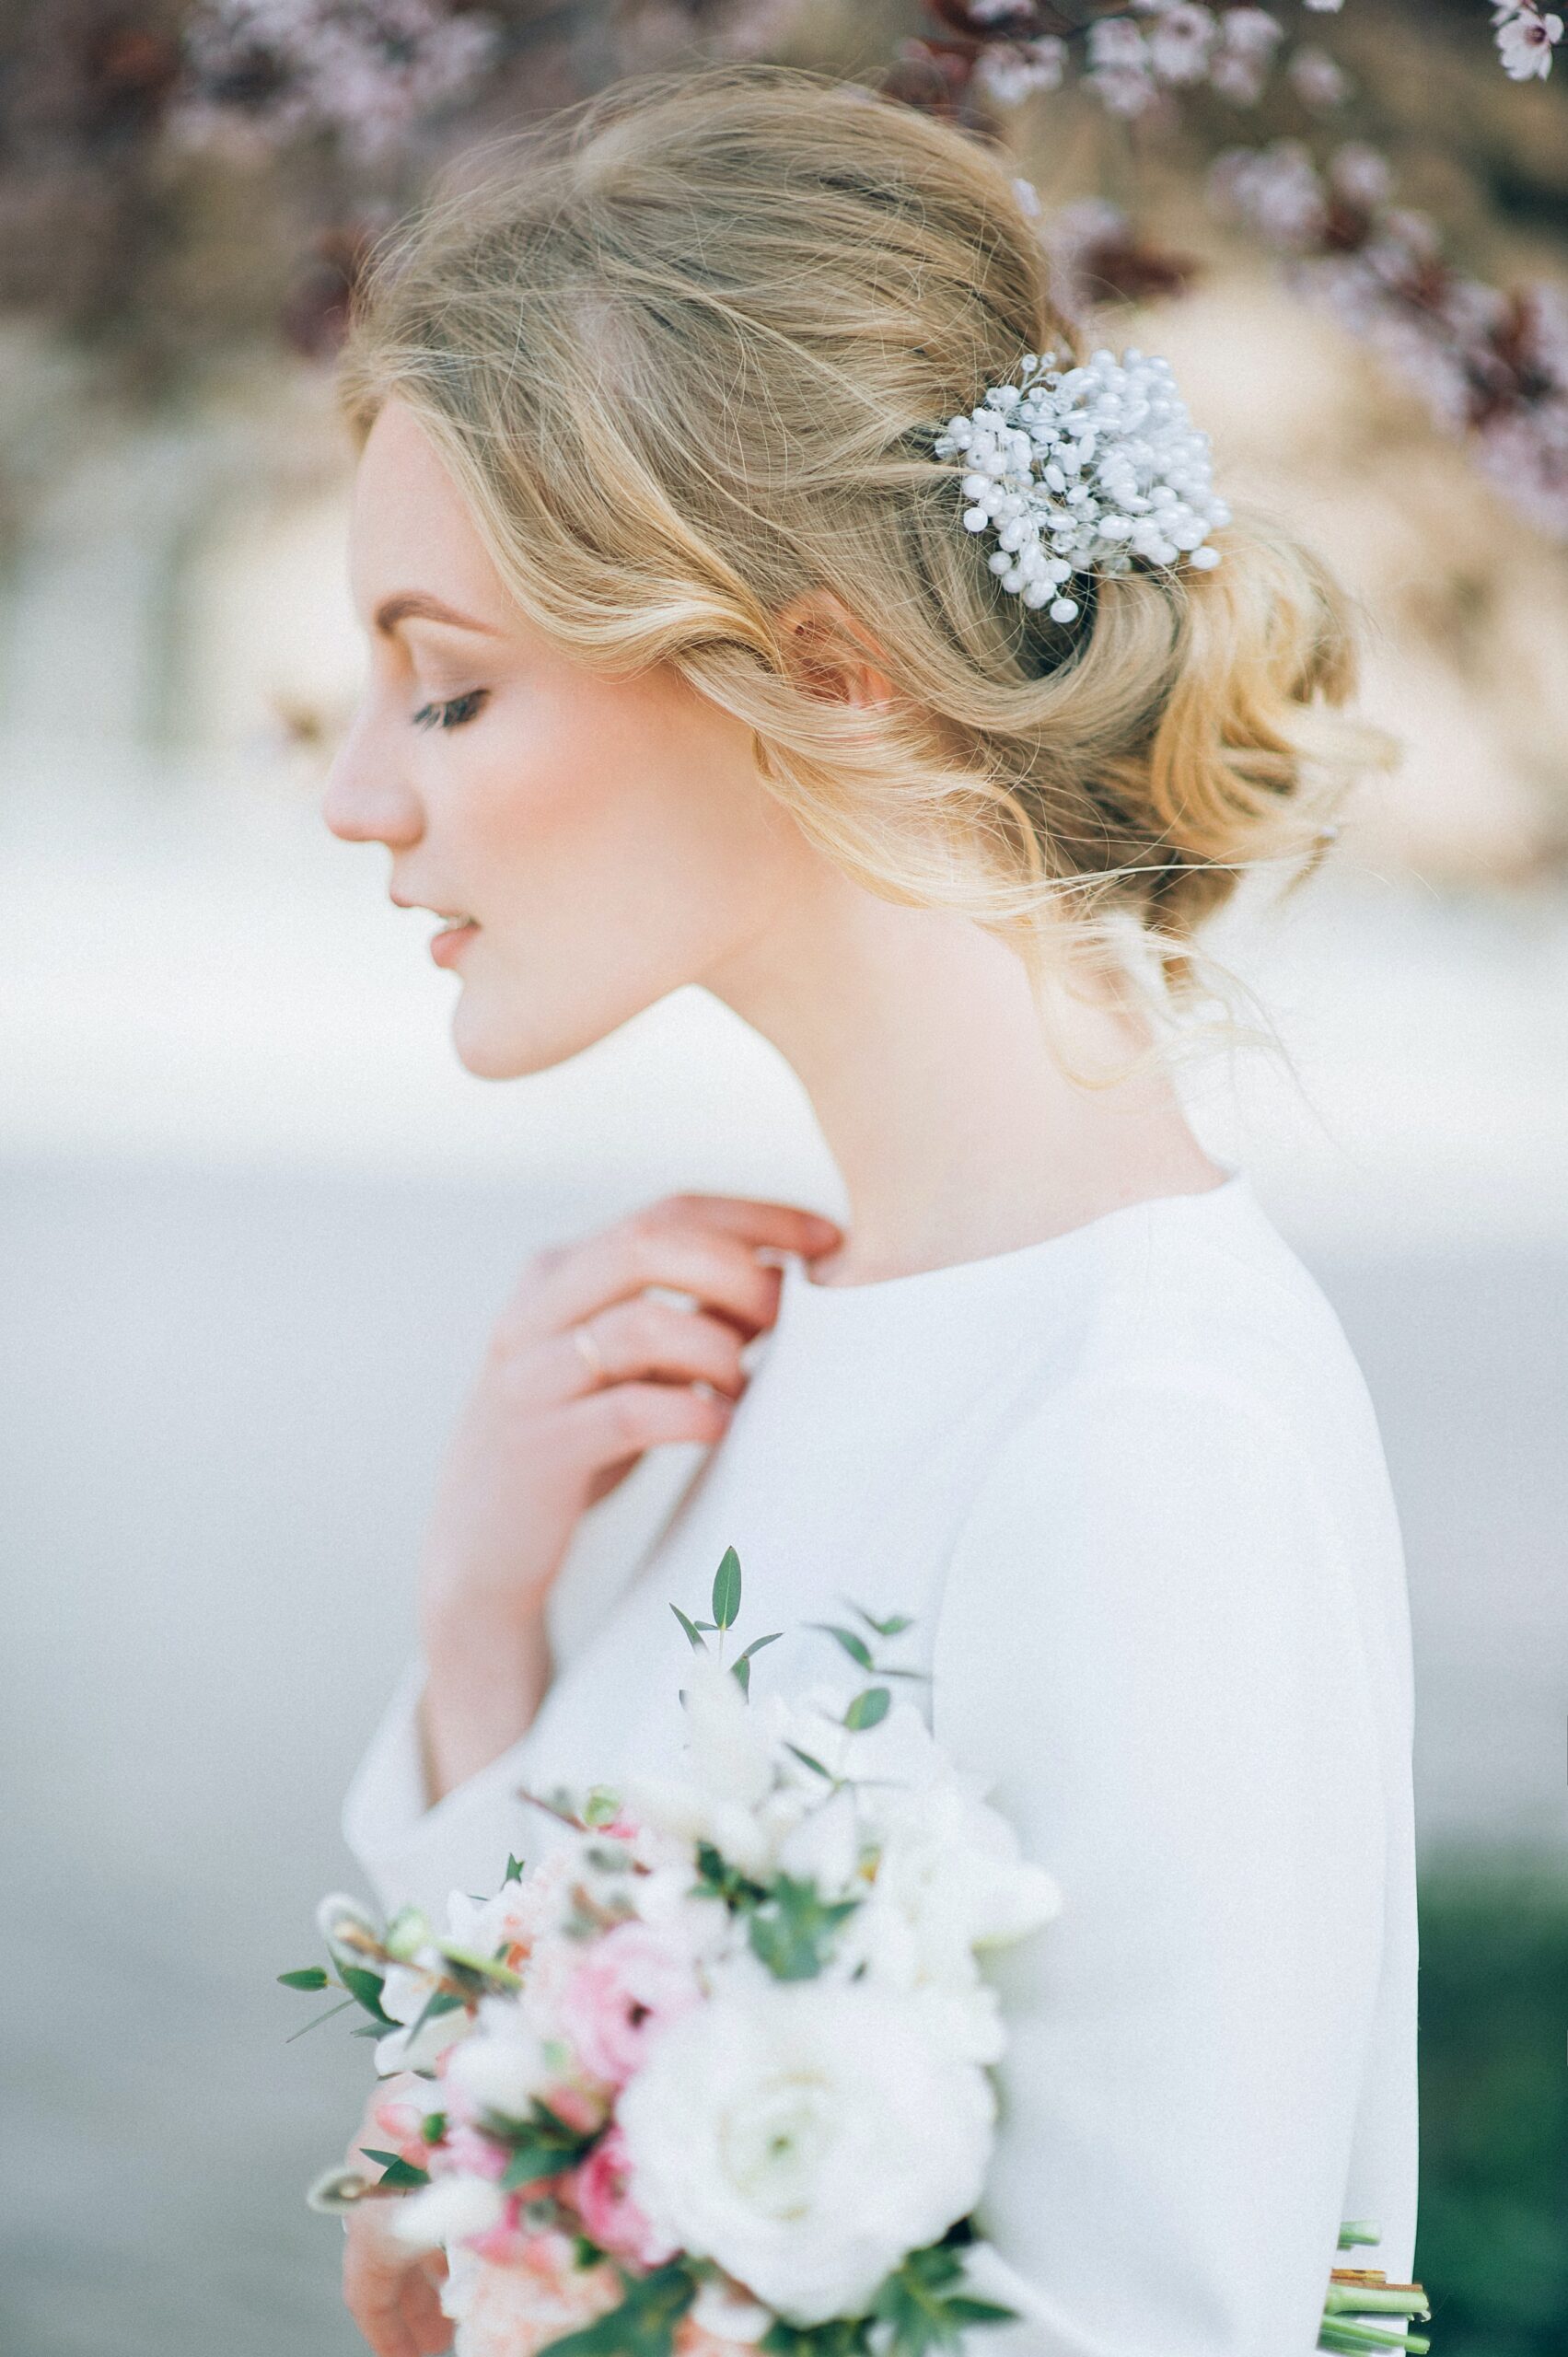 Bride with New hair style and Flowers Bouquet